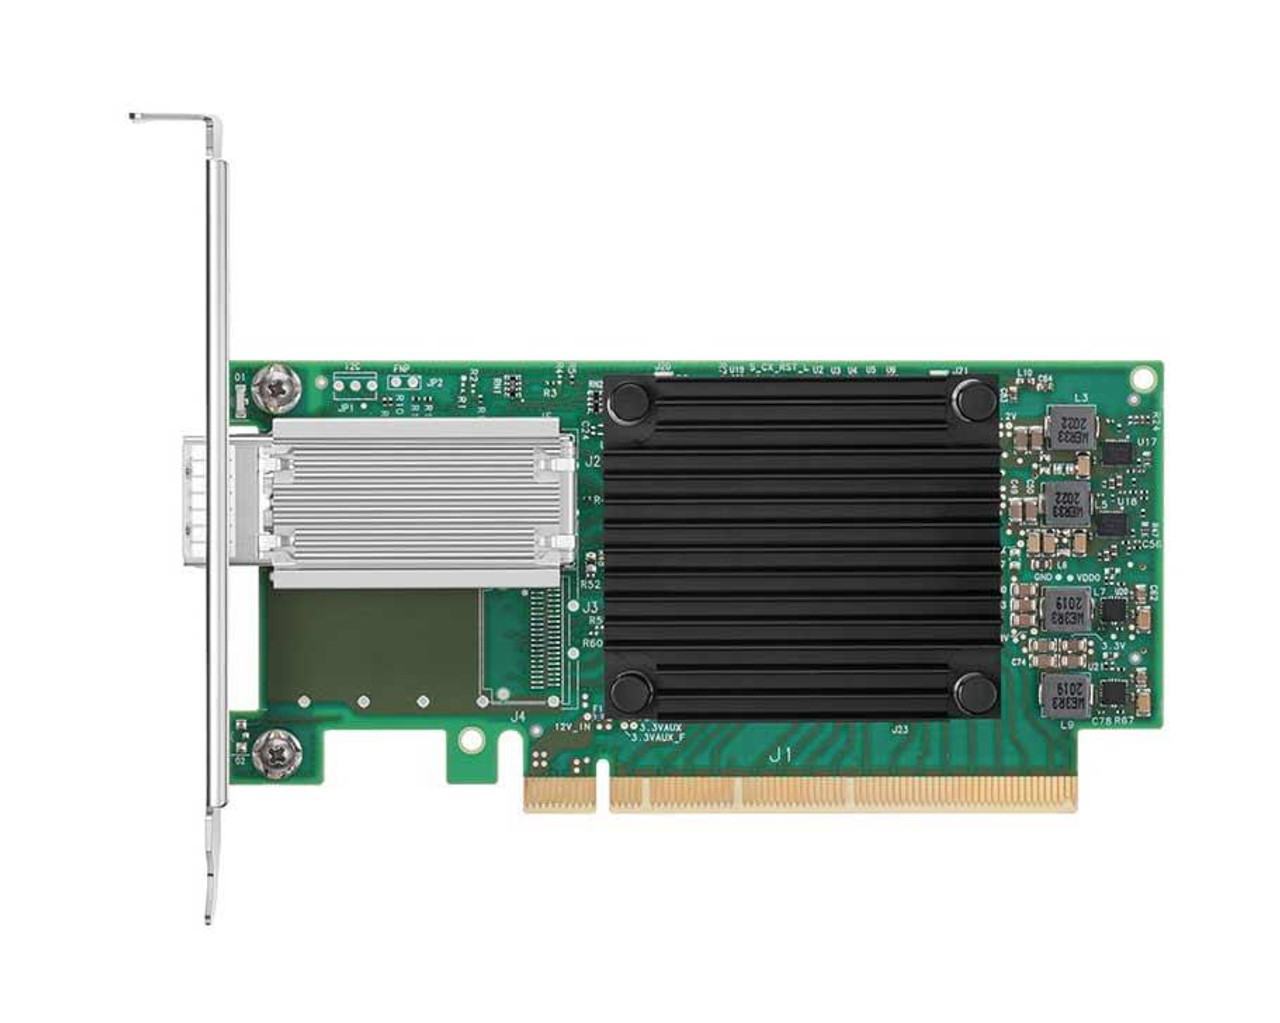 Mellanox ConnectX-5 VPI Adapter Card with Multi-Host EDR IB (100Gb/s) and 100GbE Single-port QSFP28 PCIe3.0 x4 on board external connectors to 3x